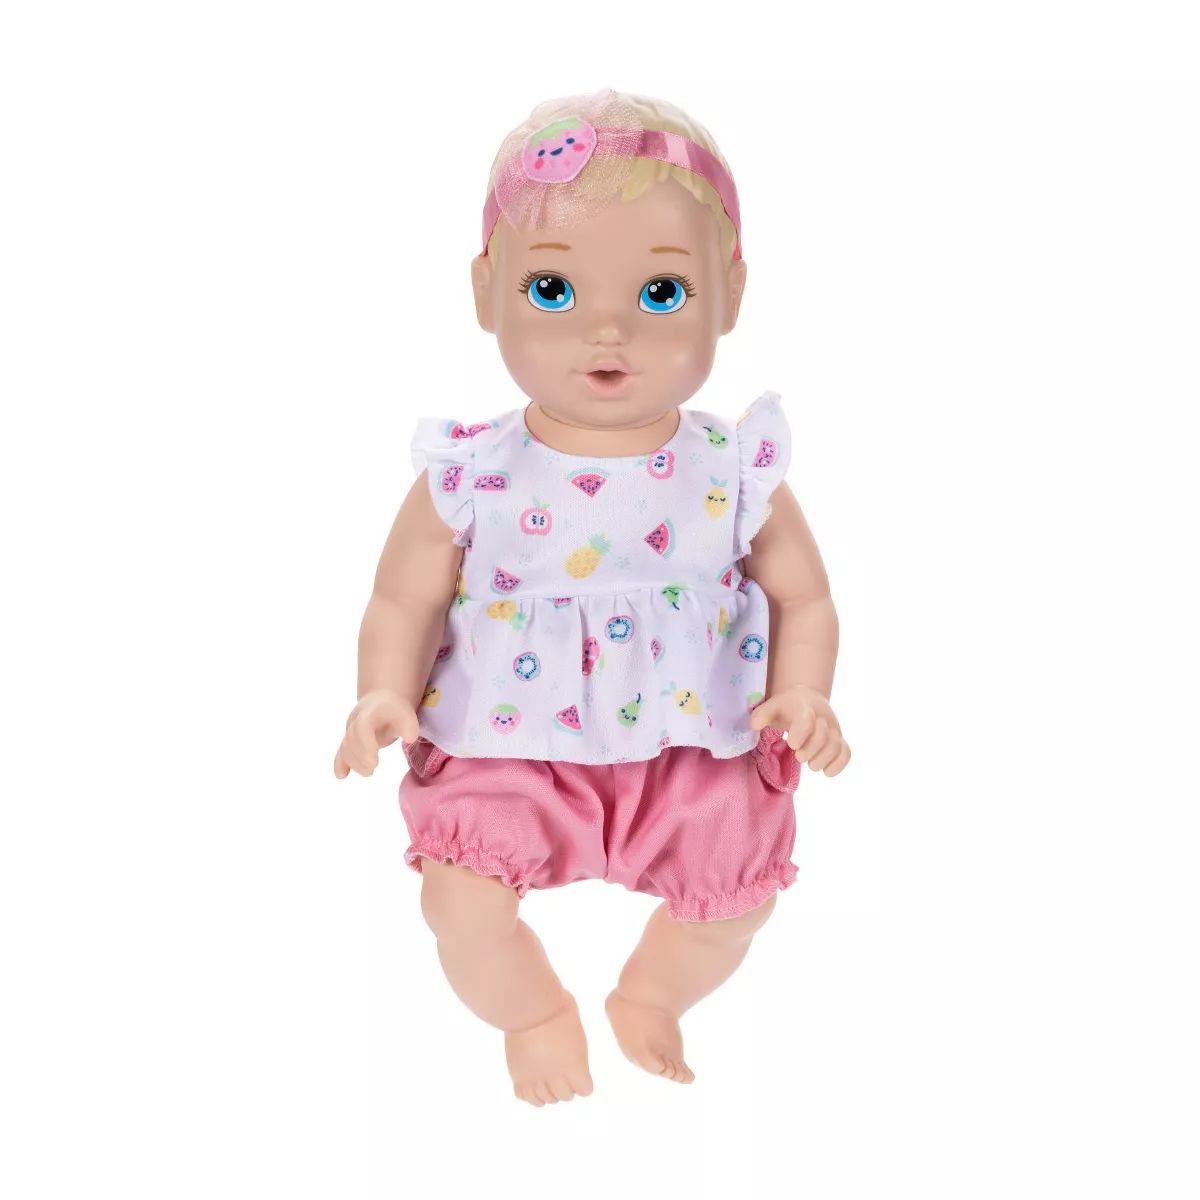 Perfectly Cute Playtime Baby Doll - Blonde Hair | Target